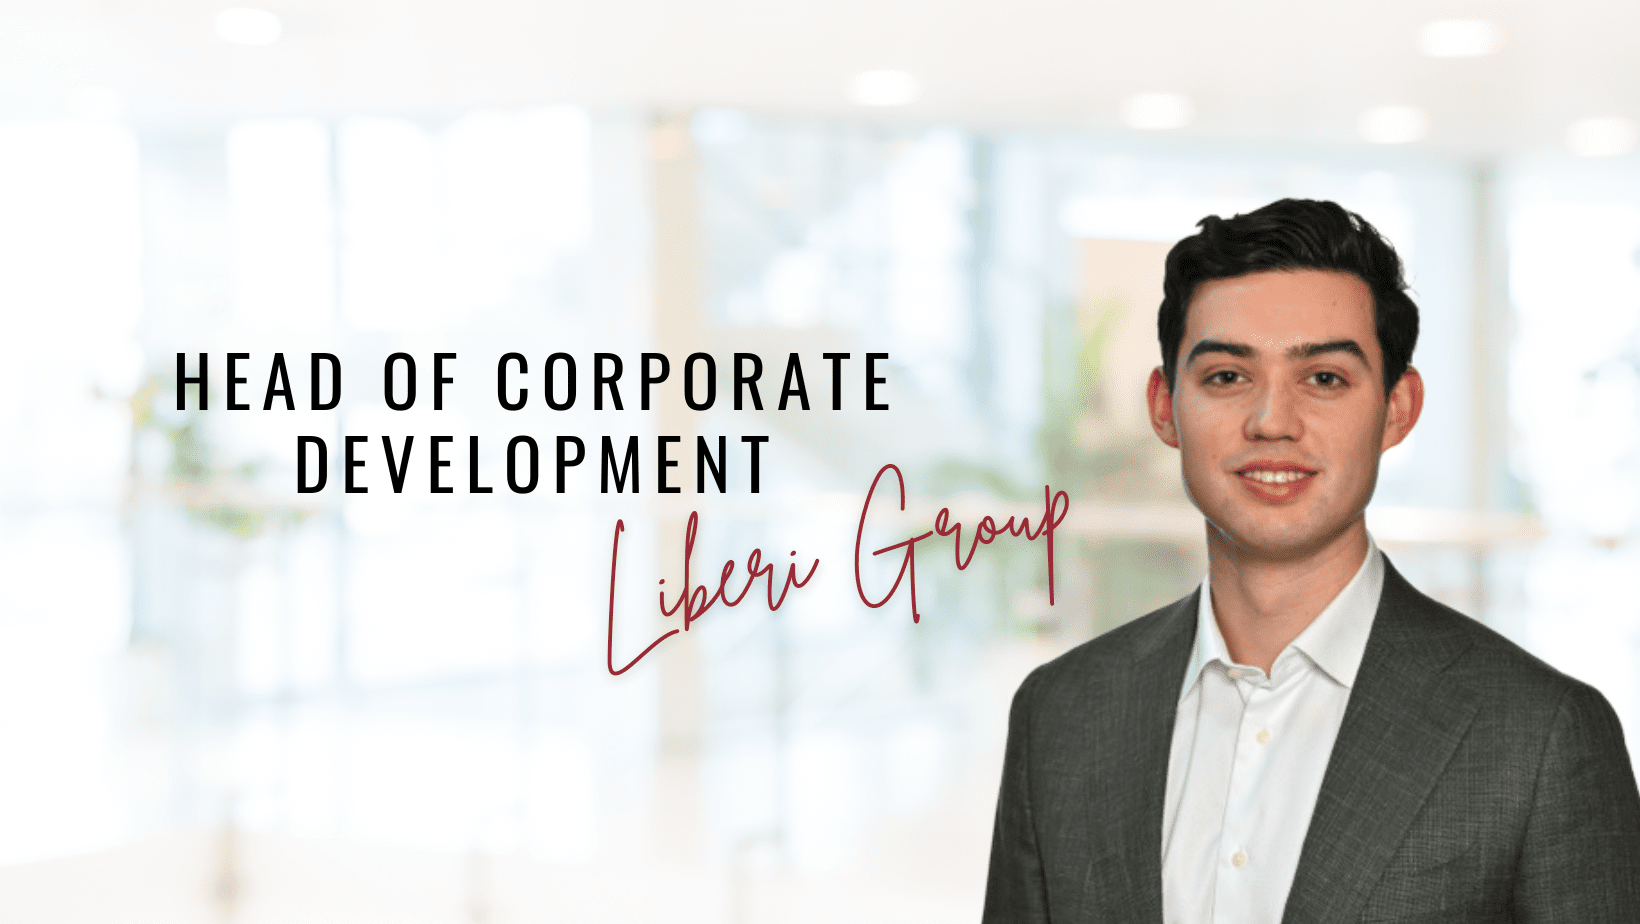 Featured image for “Head of Corporate Development”